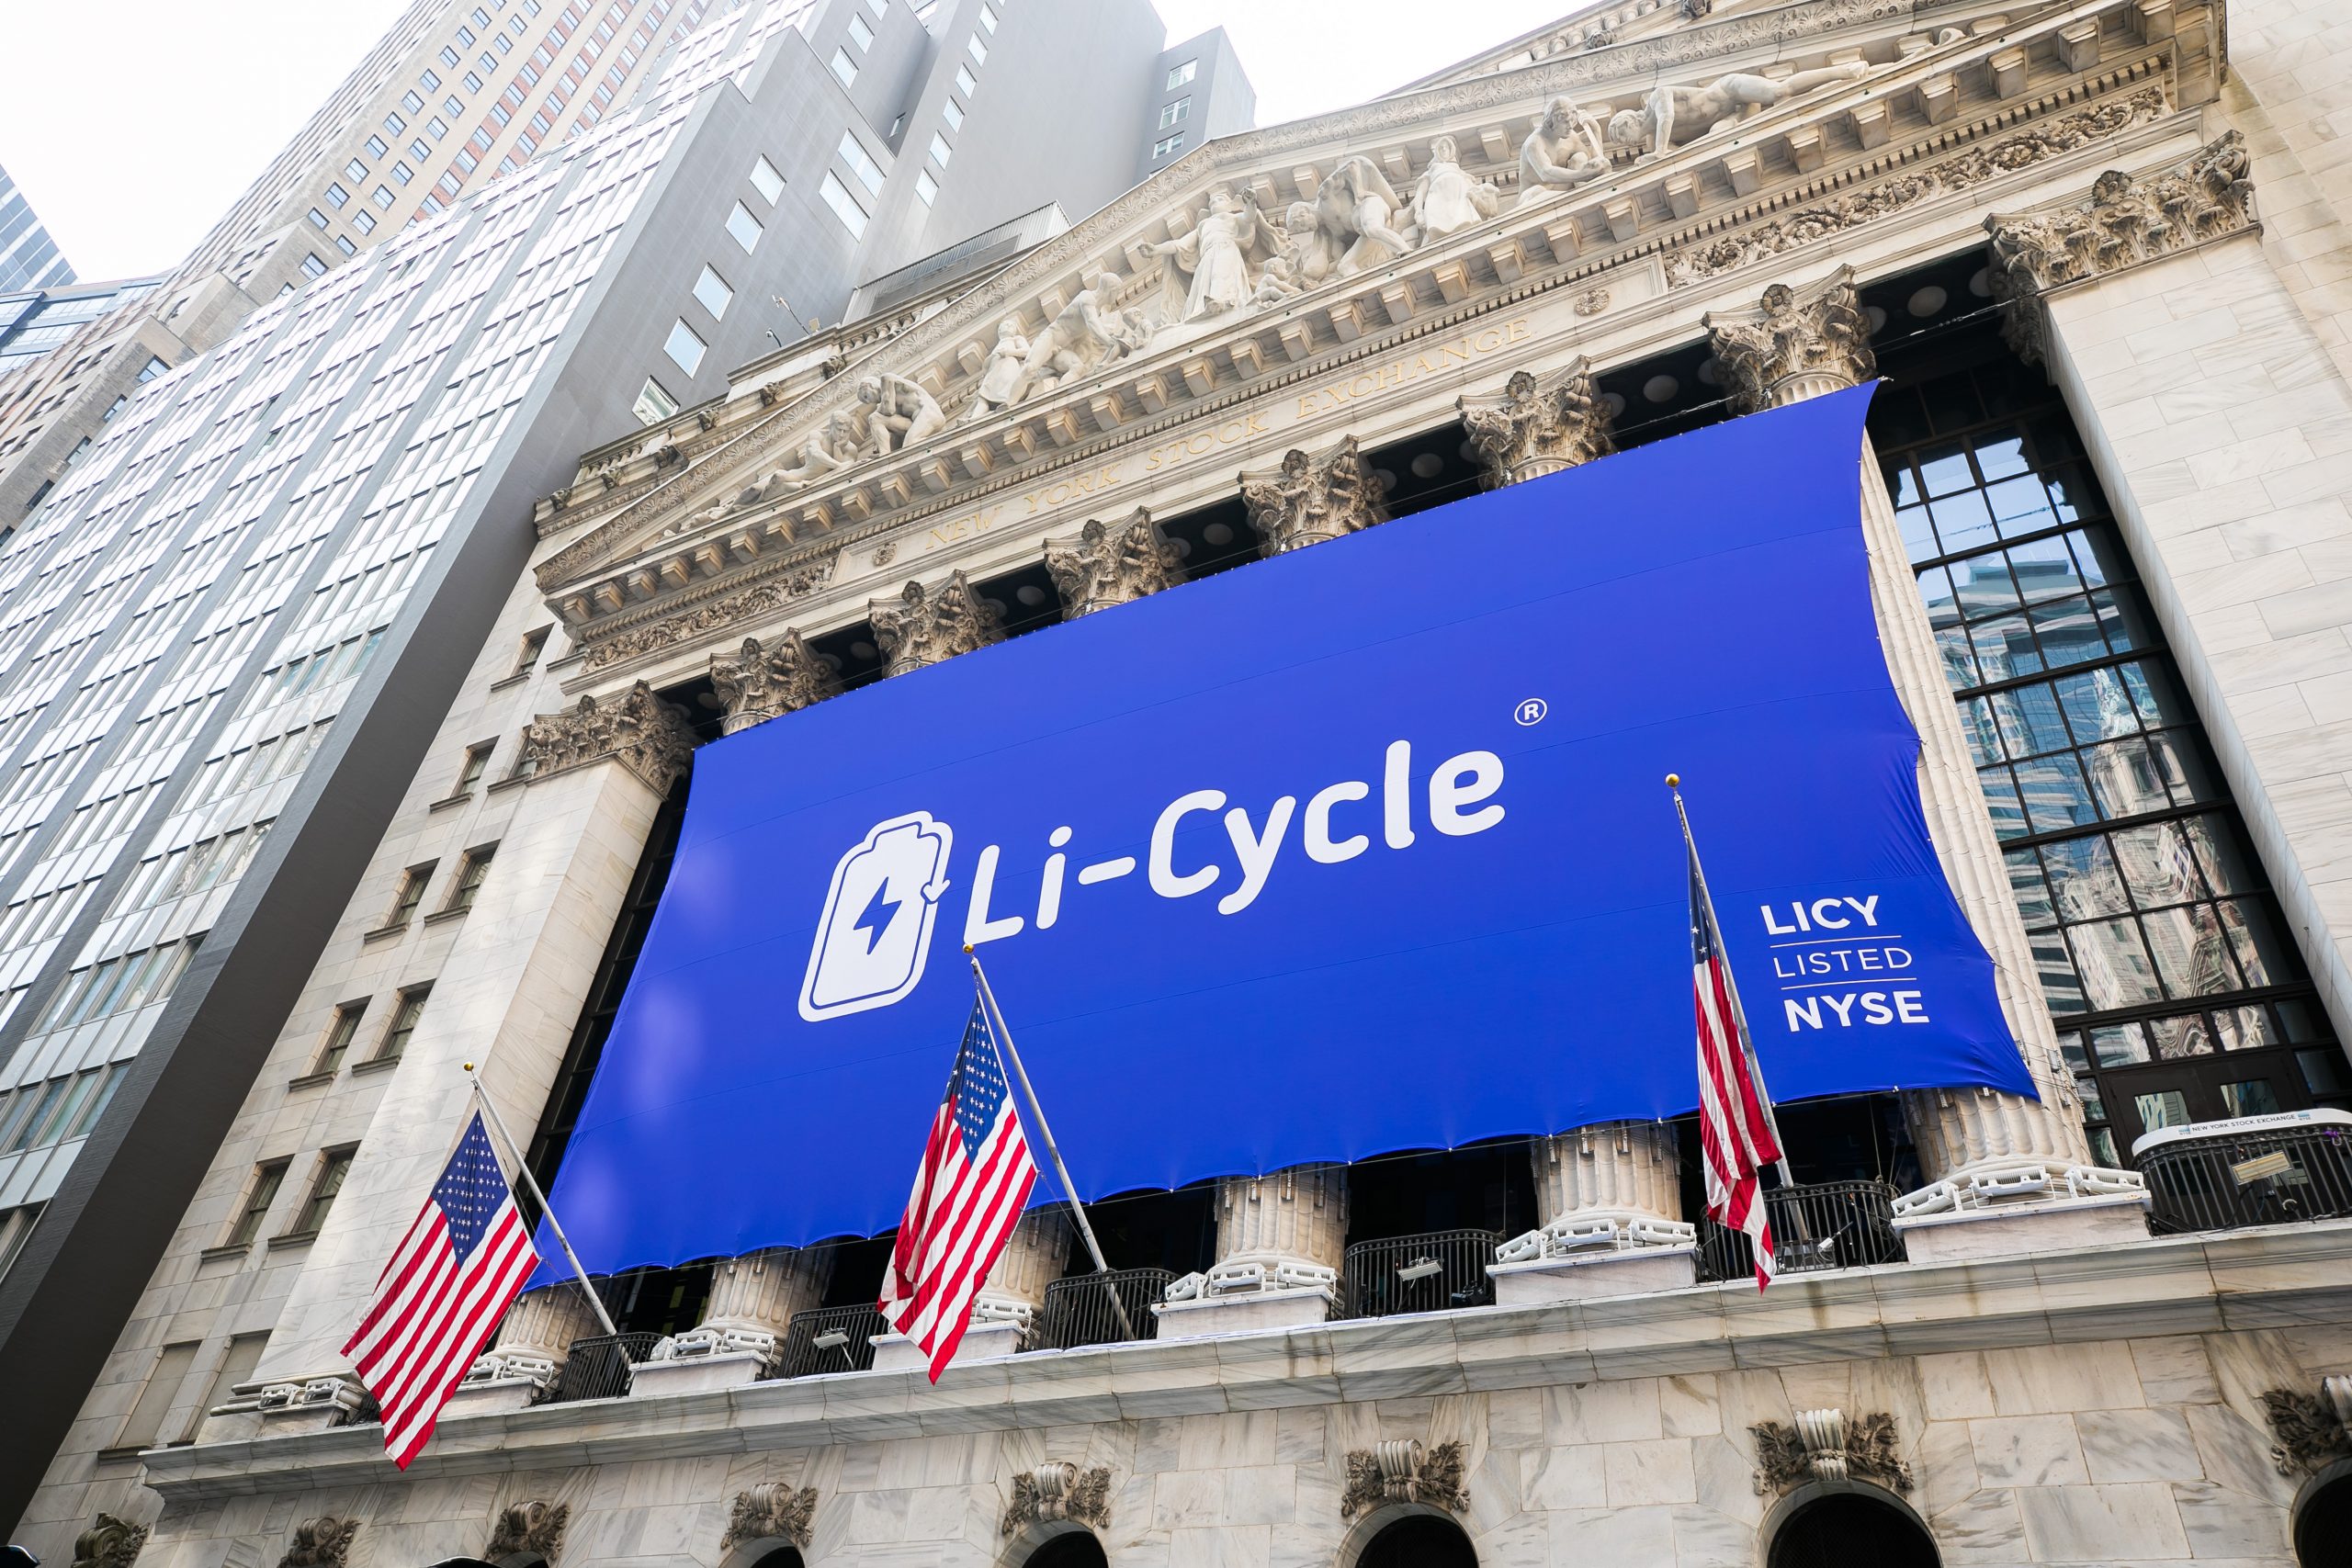 White Li-Cycle logo on large blue banner hung at the exterior of the New York Stock Exchange